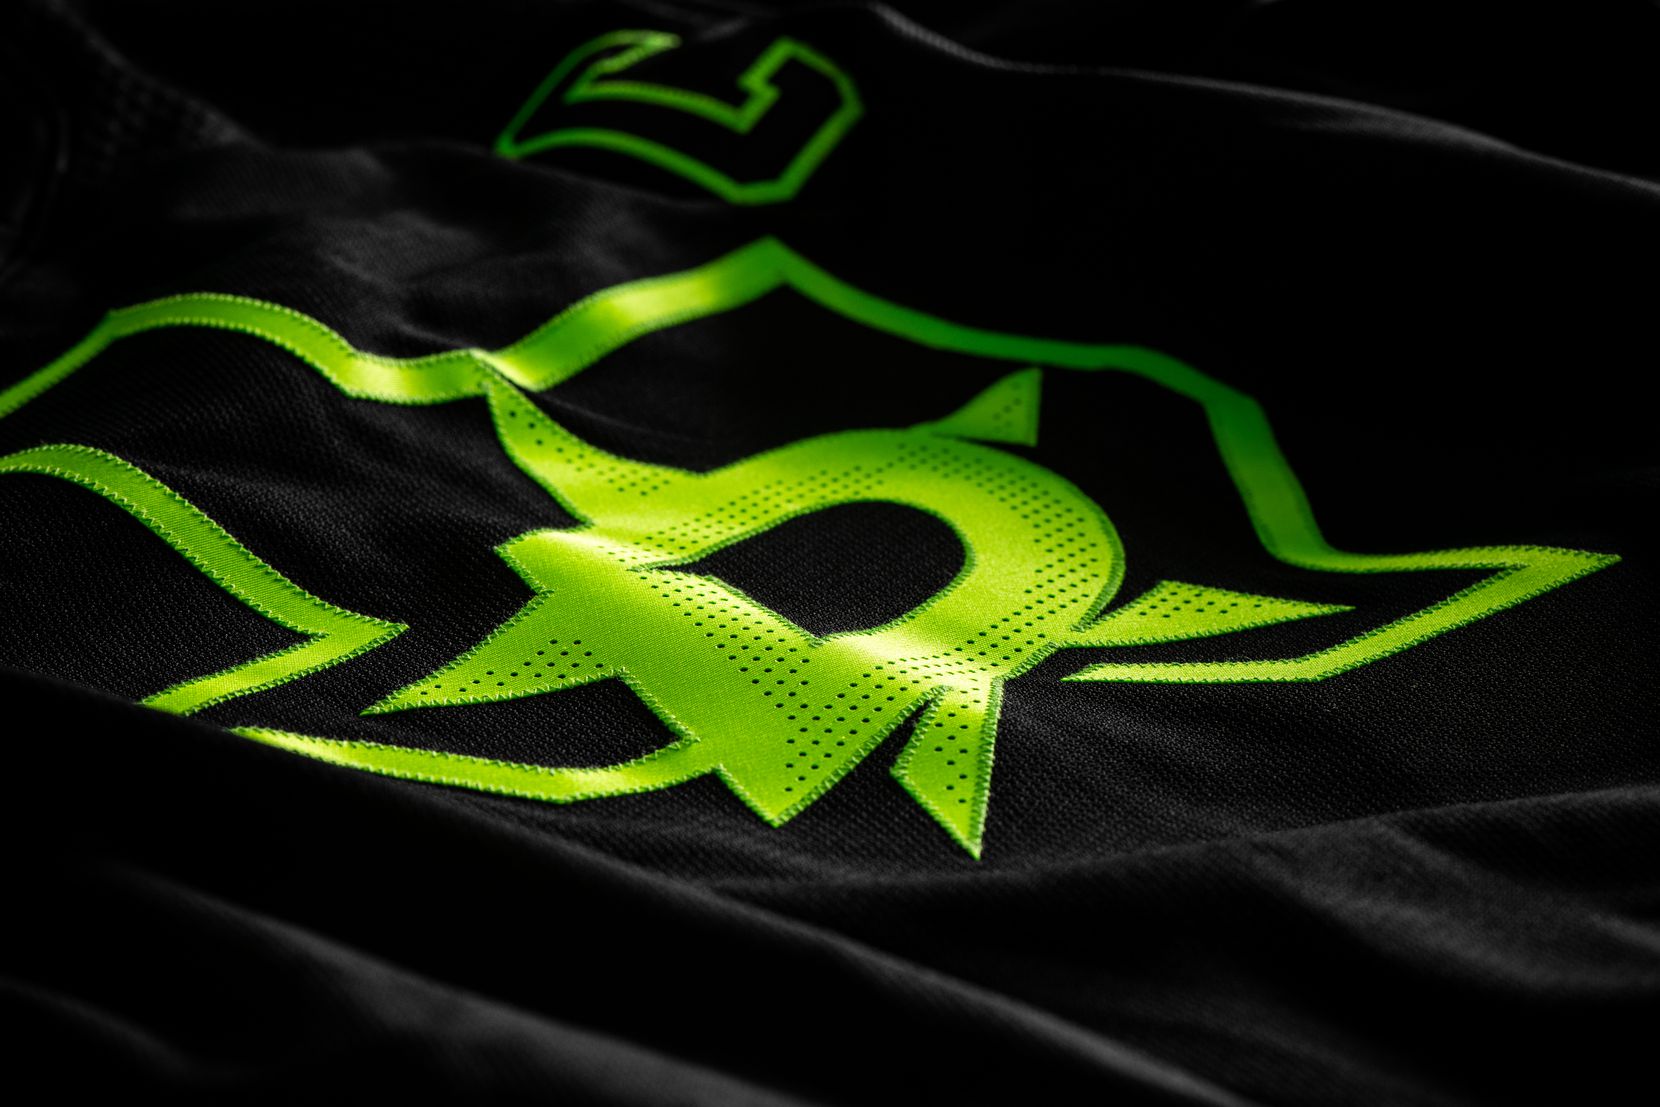 The Dallas Stars revealed their new third jersey on Wednesday morning "black out" By the team and by using the color neon green the team called it "Skyline Green."